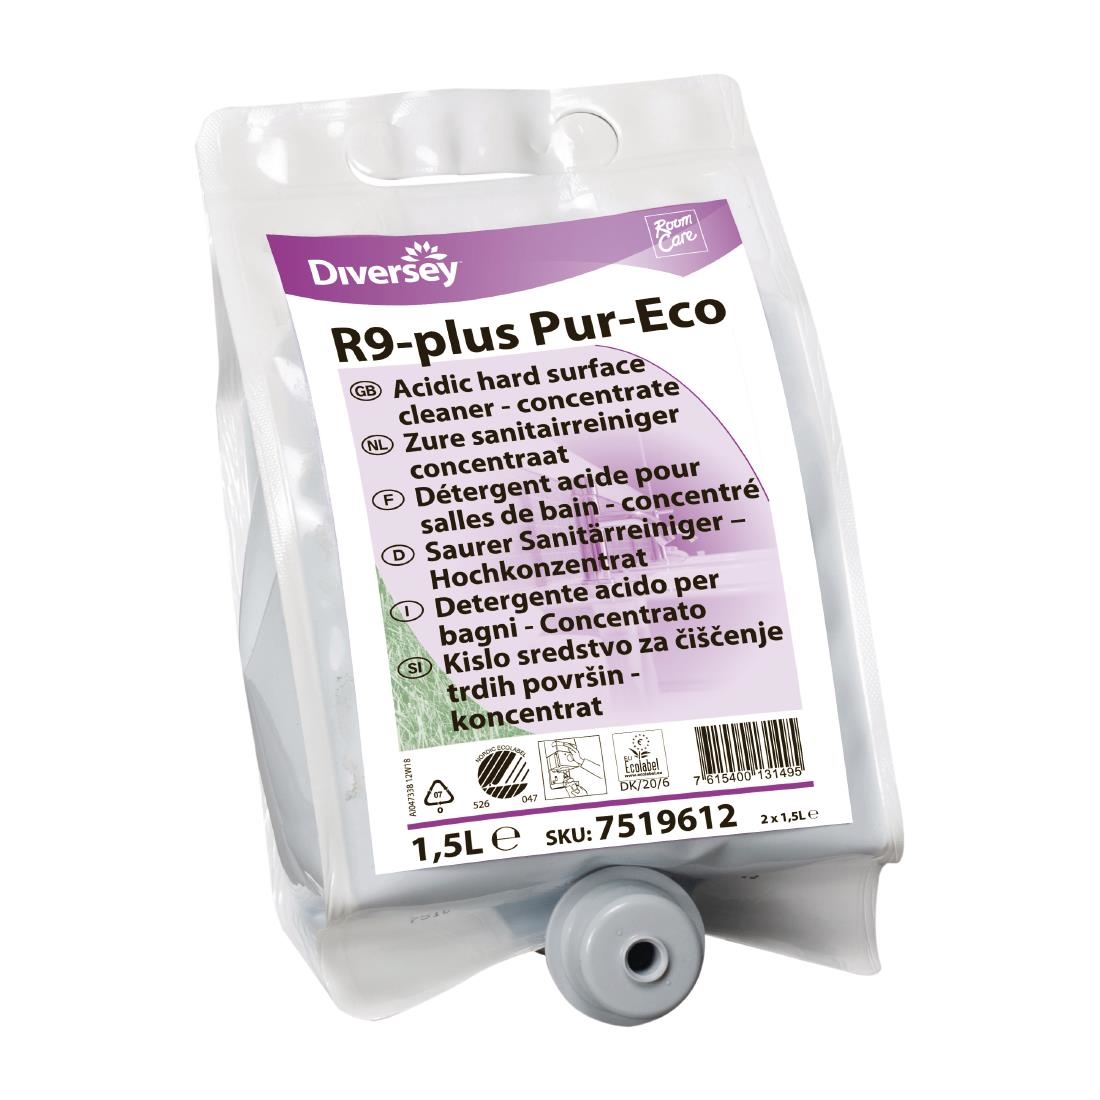 Room Care R9-plus Pur-Eco Bathroom Cleaner Concentrate 1.5Ltr (2 Pack)